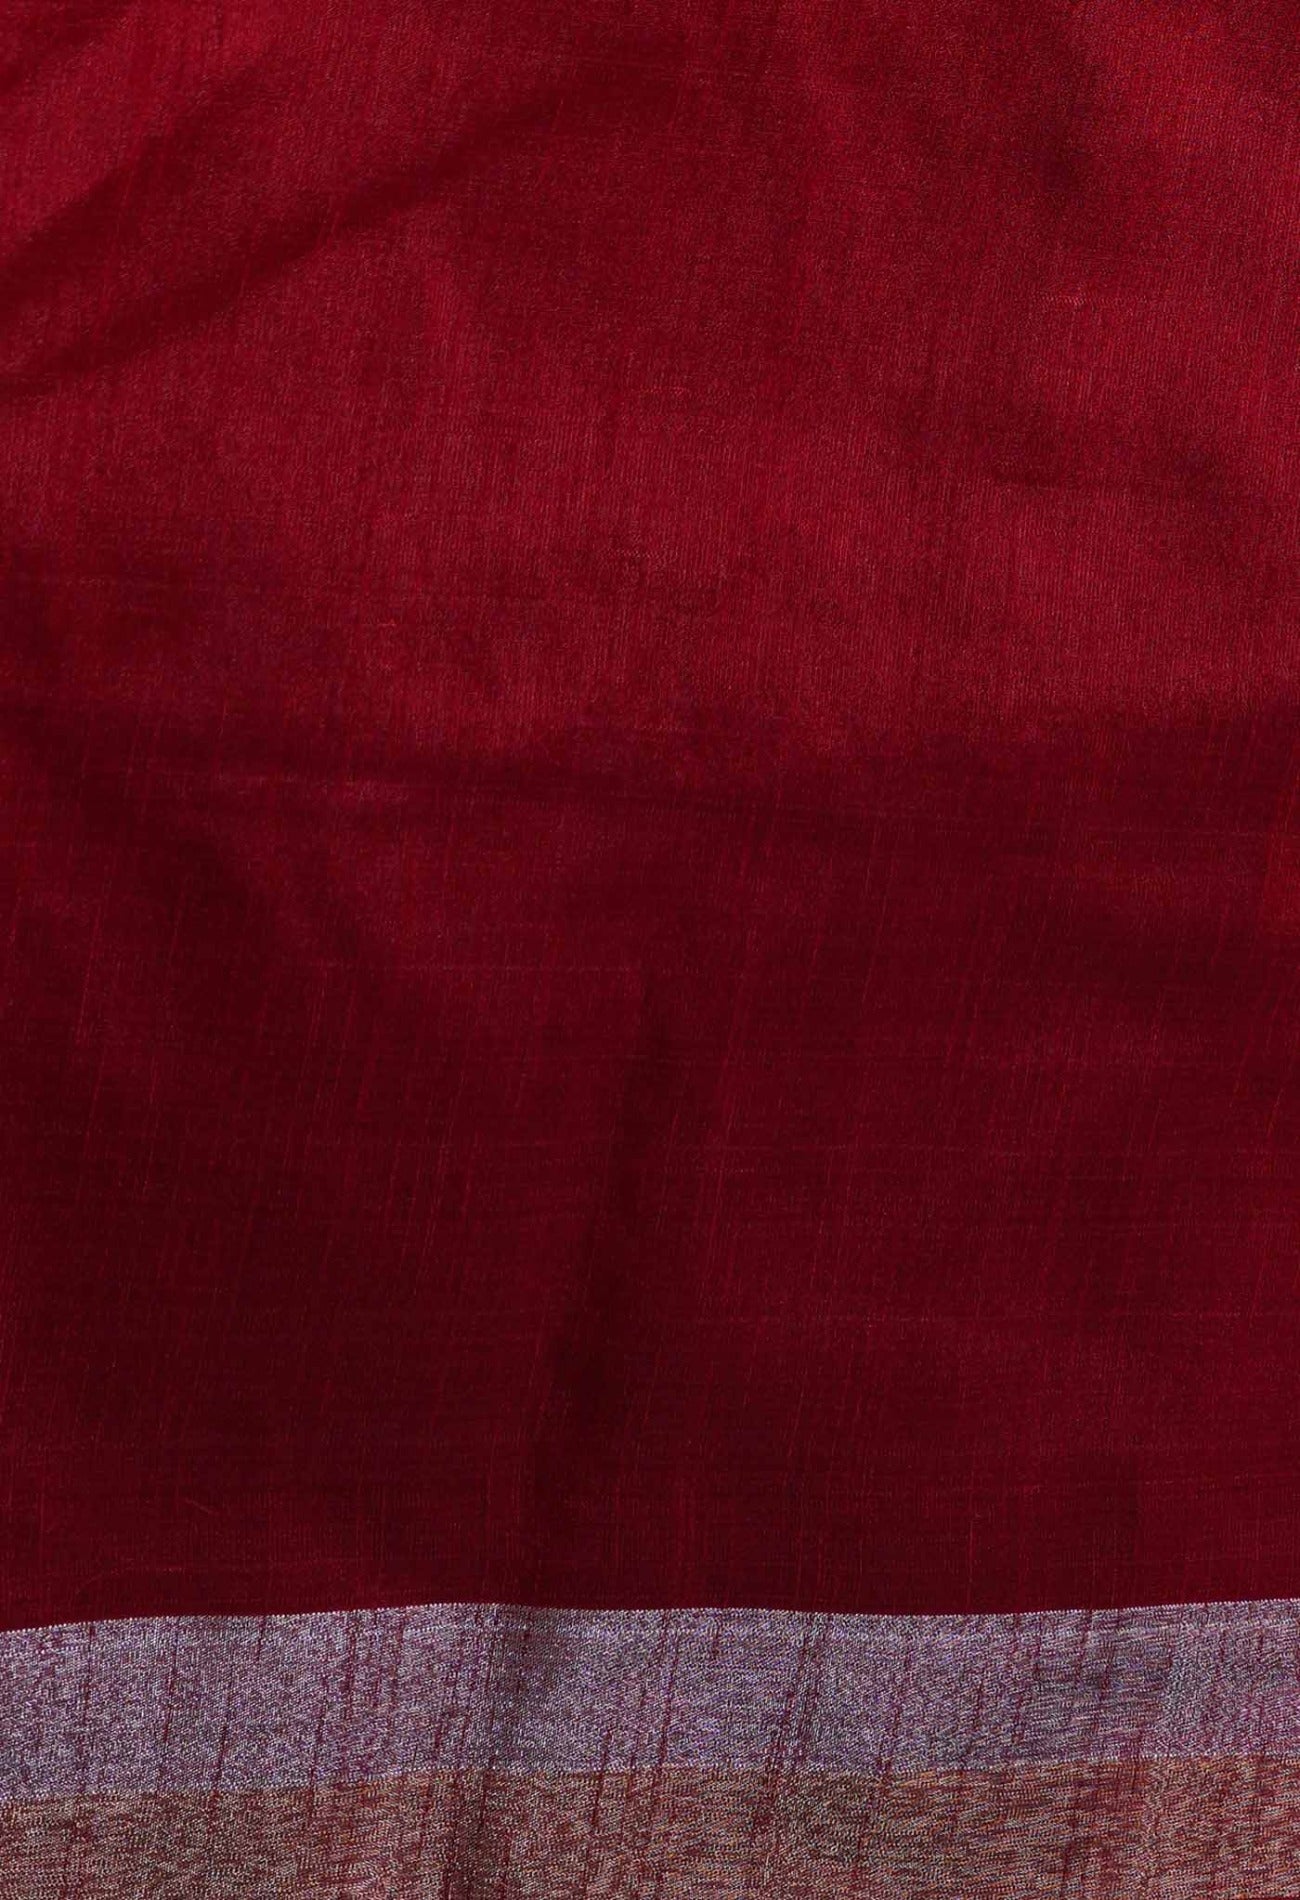 Online Shopping for Maroon  Bengal Linen Saree with Weaving from West Bengal at Unnatisilks.com India
